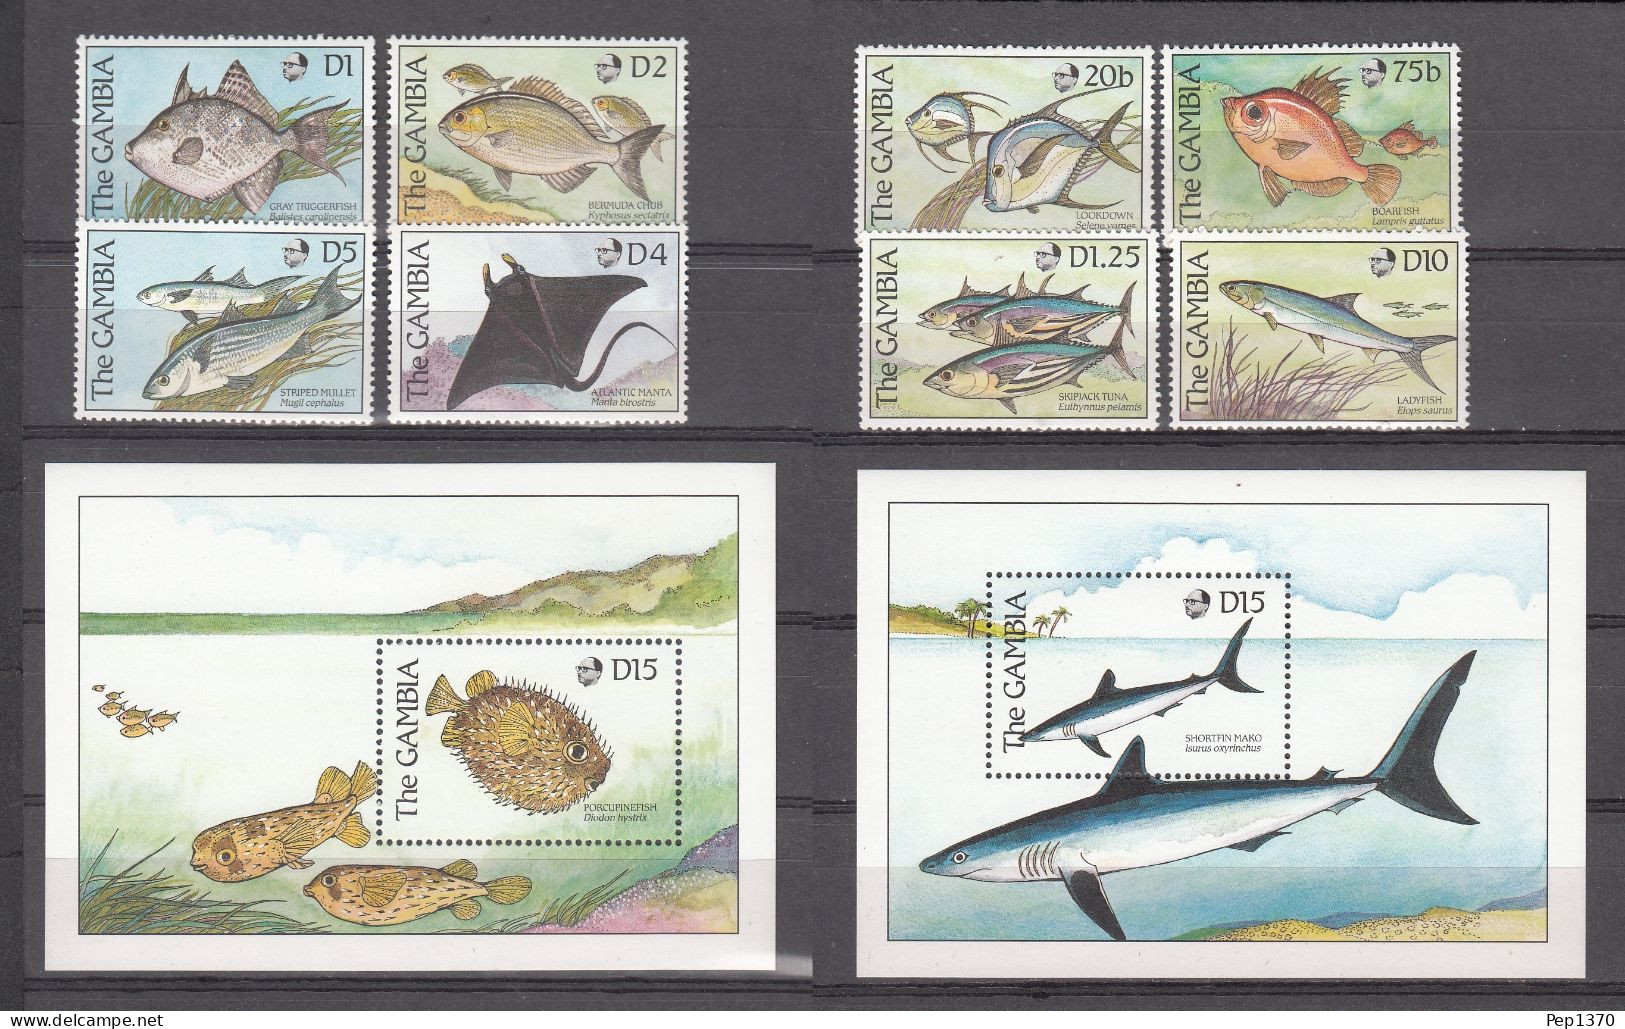 GAMBIA 1989 - PECES - FISHES - POISSONS - YVERT 829/832 + 837/840** + HB-74 + HB-76** - Fische